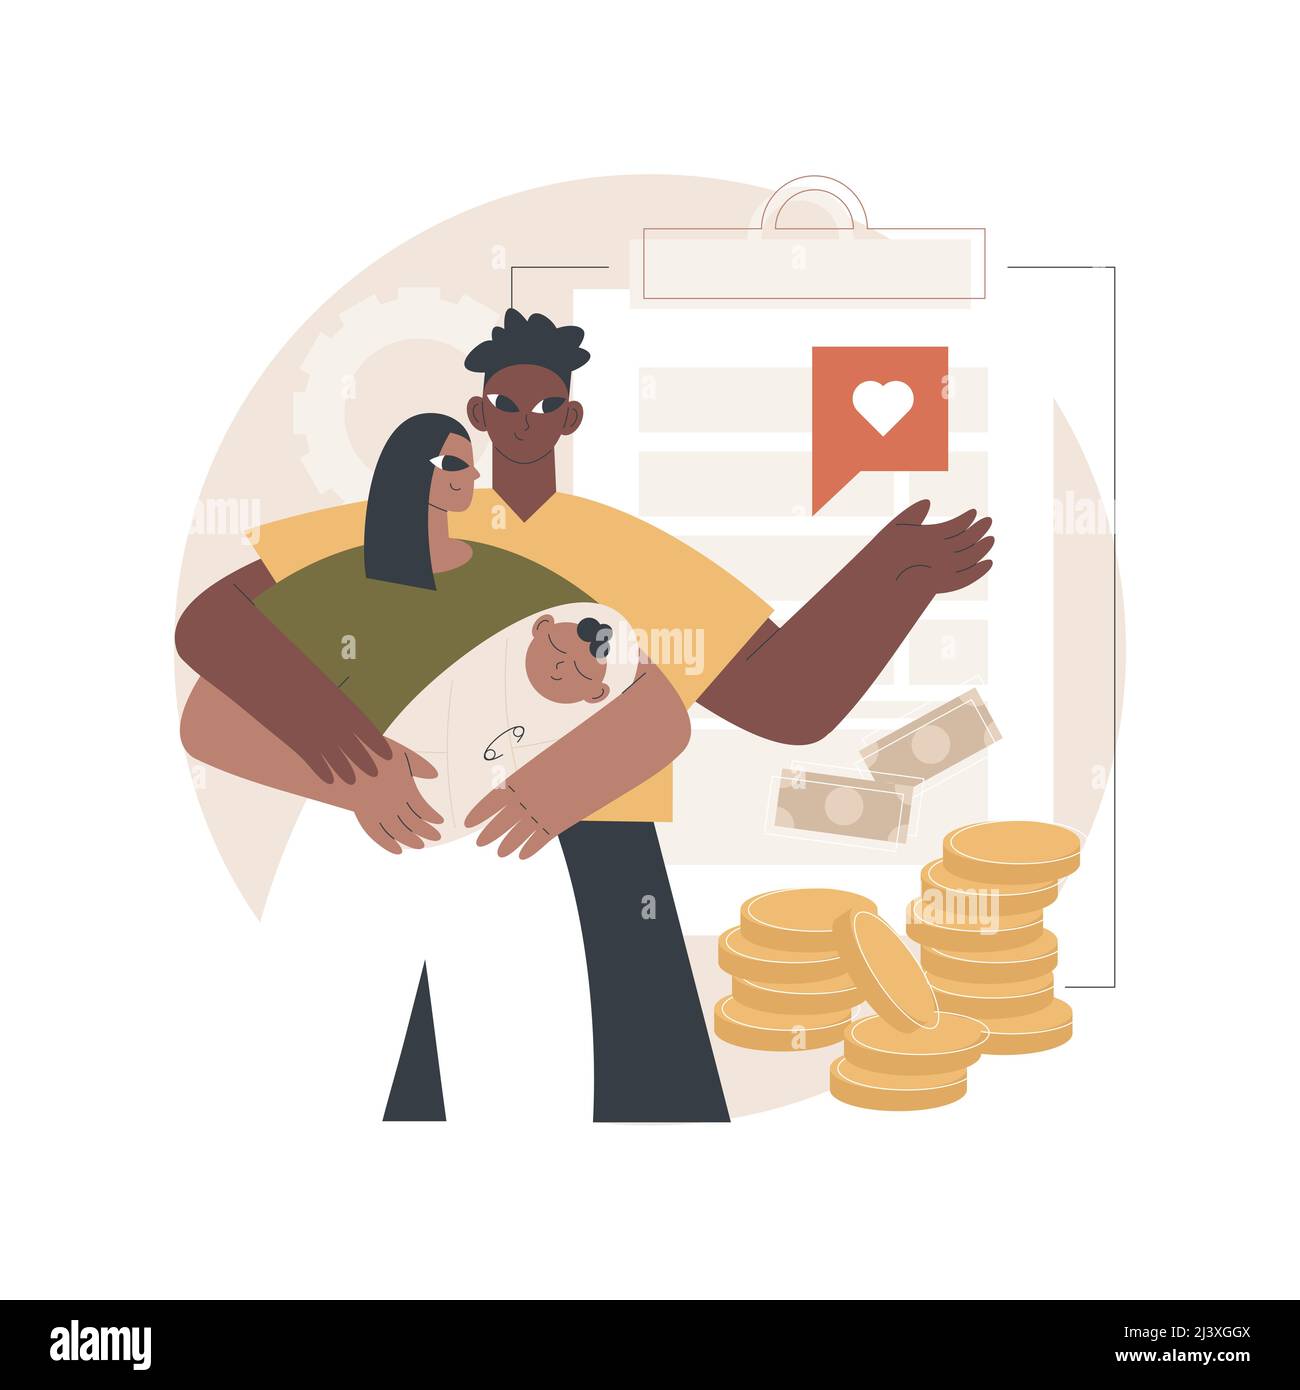 Child benefit abstract concept vector illustration. Dependent care costs, benefit plan, family income, budget planning, working parents support, socia Stock Vector